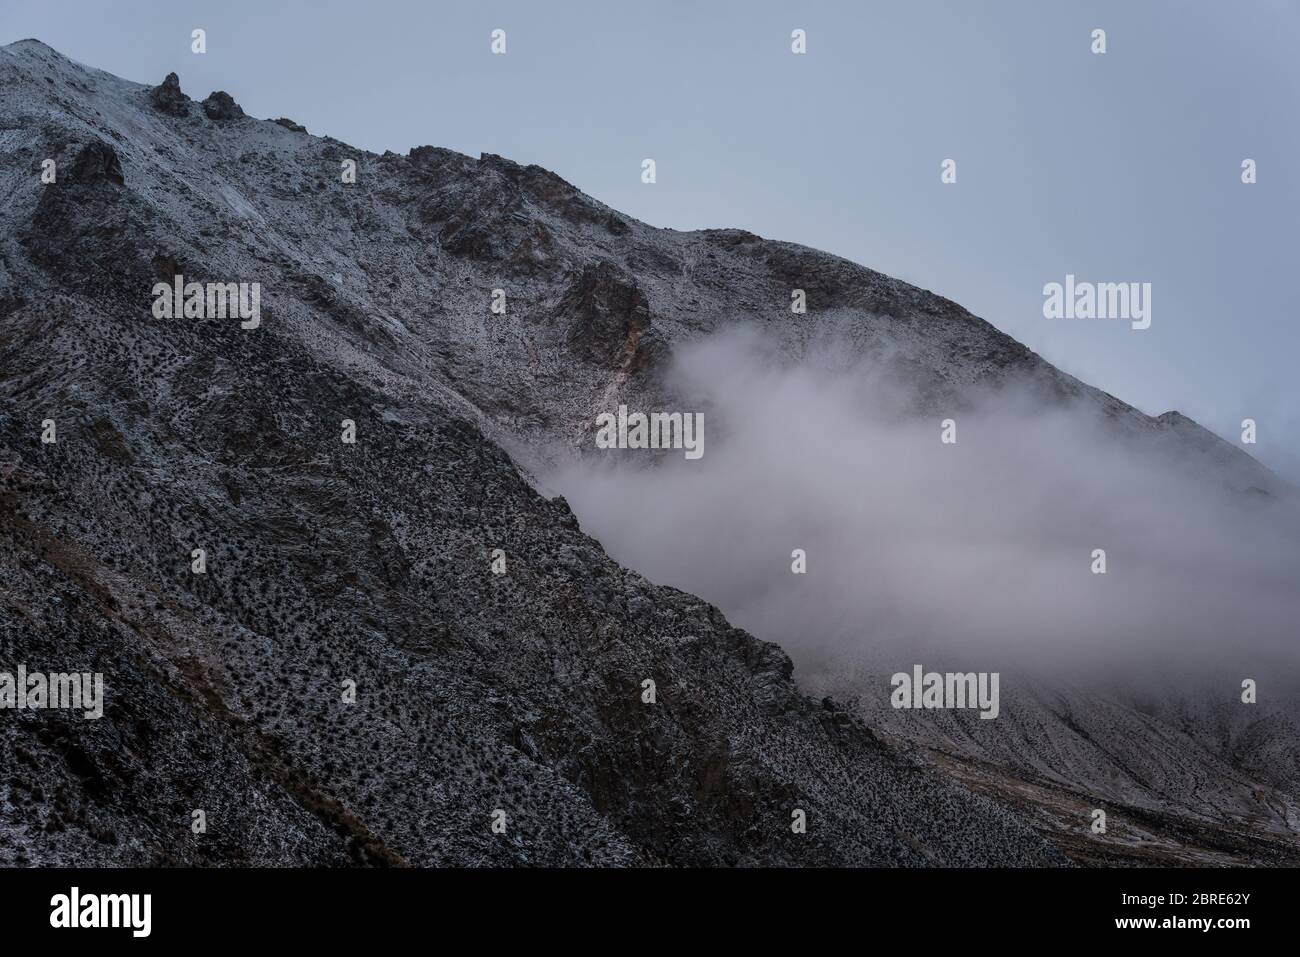 View of snow mountain surrounded by clouds with morning fog Stock Photo